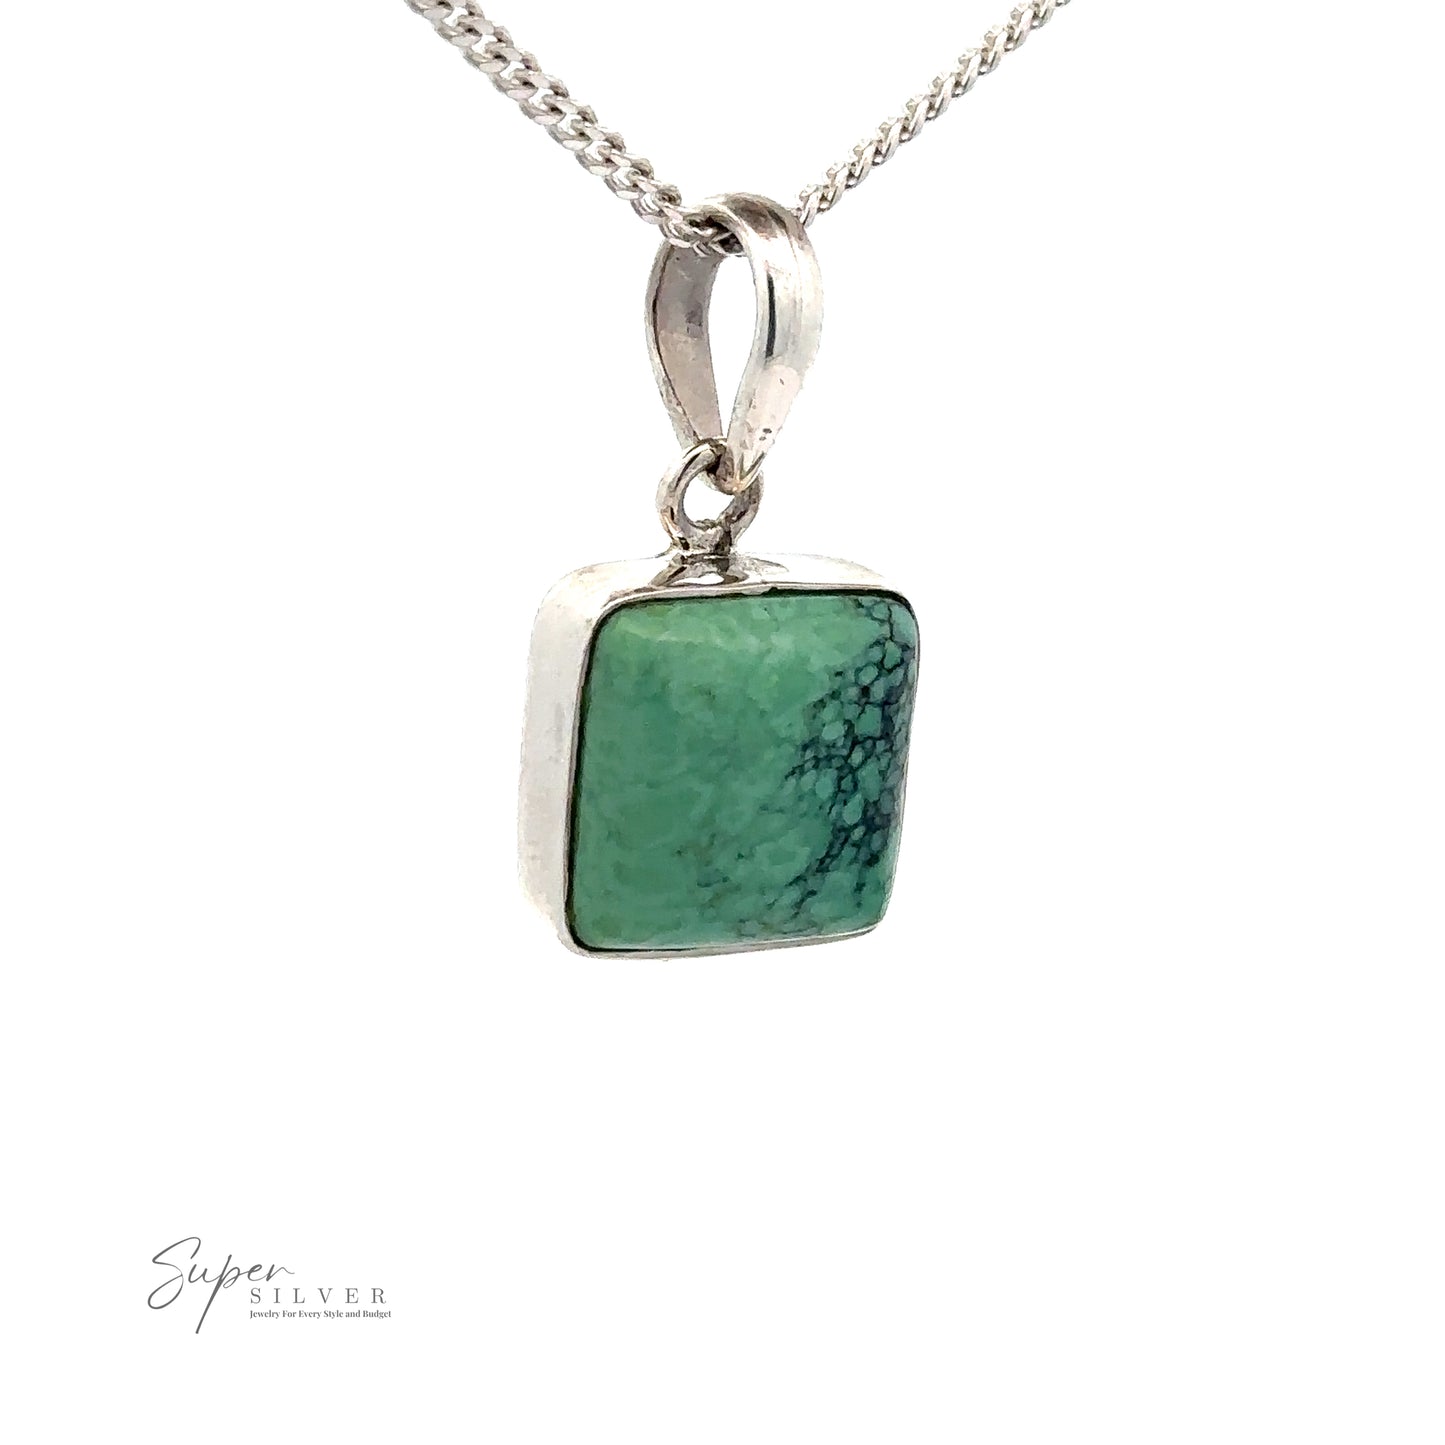 
                  
                    A Natural Turquoise Square Pendant featuring a rectangular green stone with a subtle veining pattern, attached to a .925 Sterling Silver chain. The text "Super Silver" is visible in the bottom left corner.
                  
                